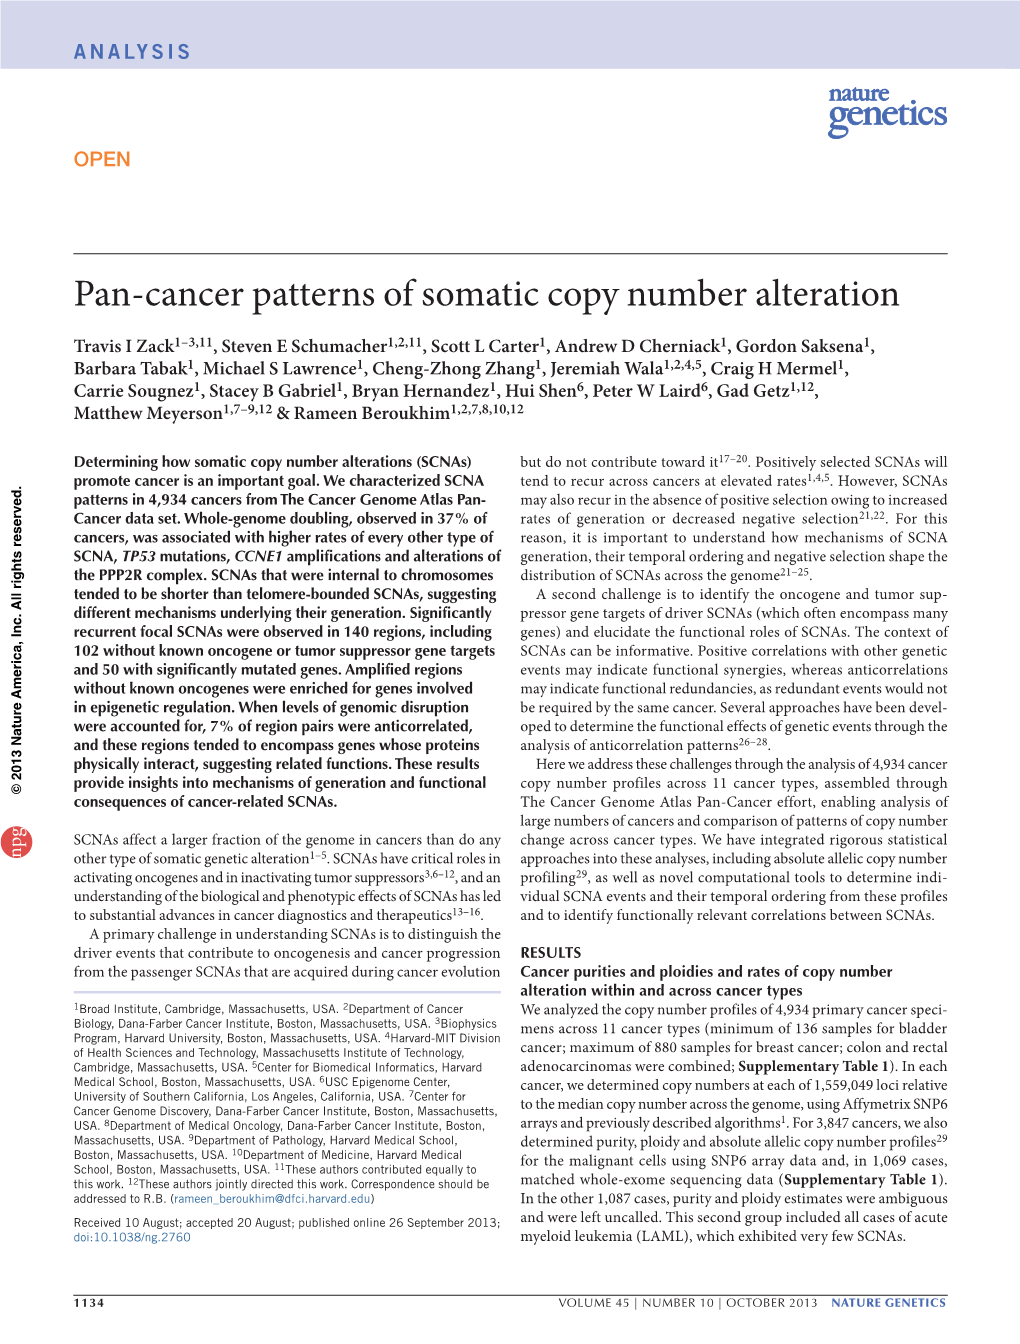 Pan-Cancer Patterns of Somatic Copy Number Alteration